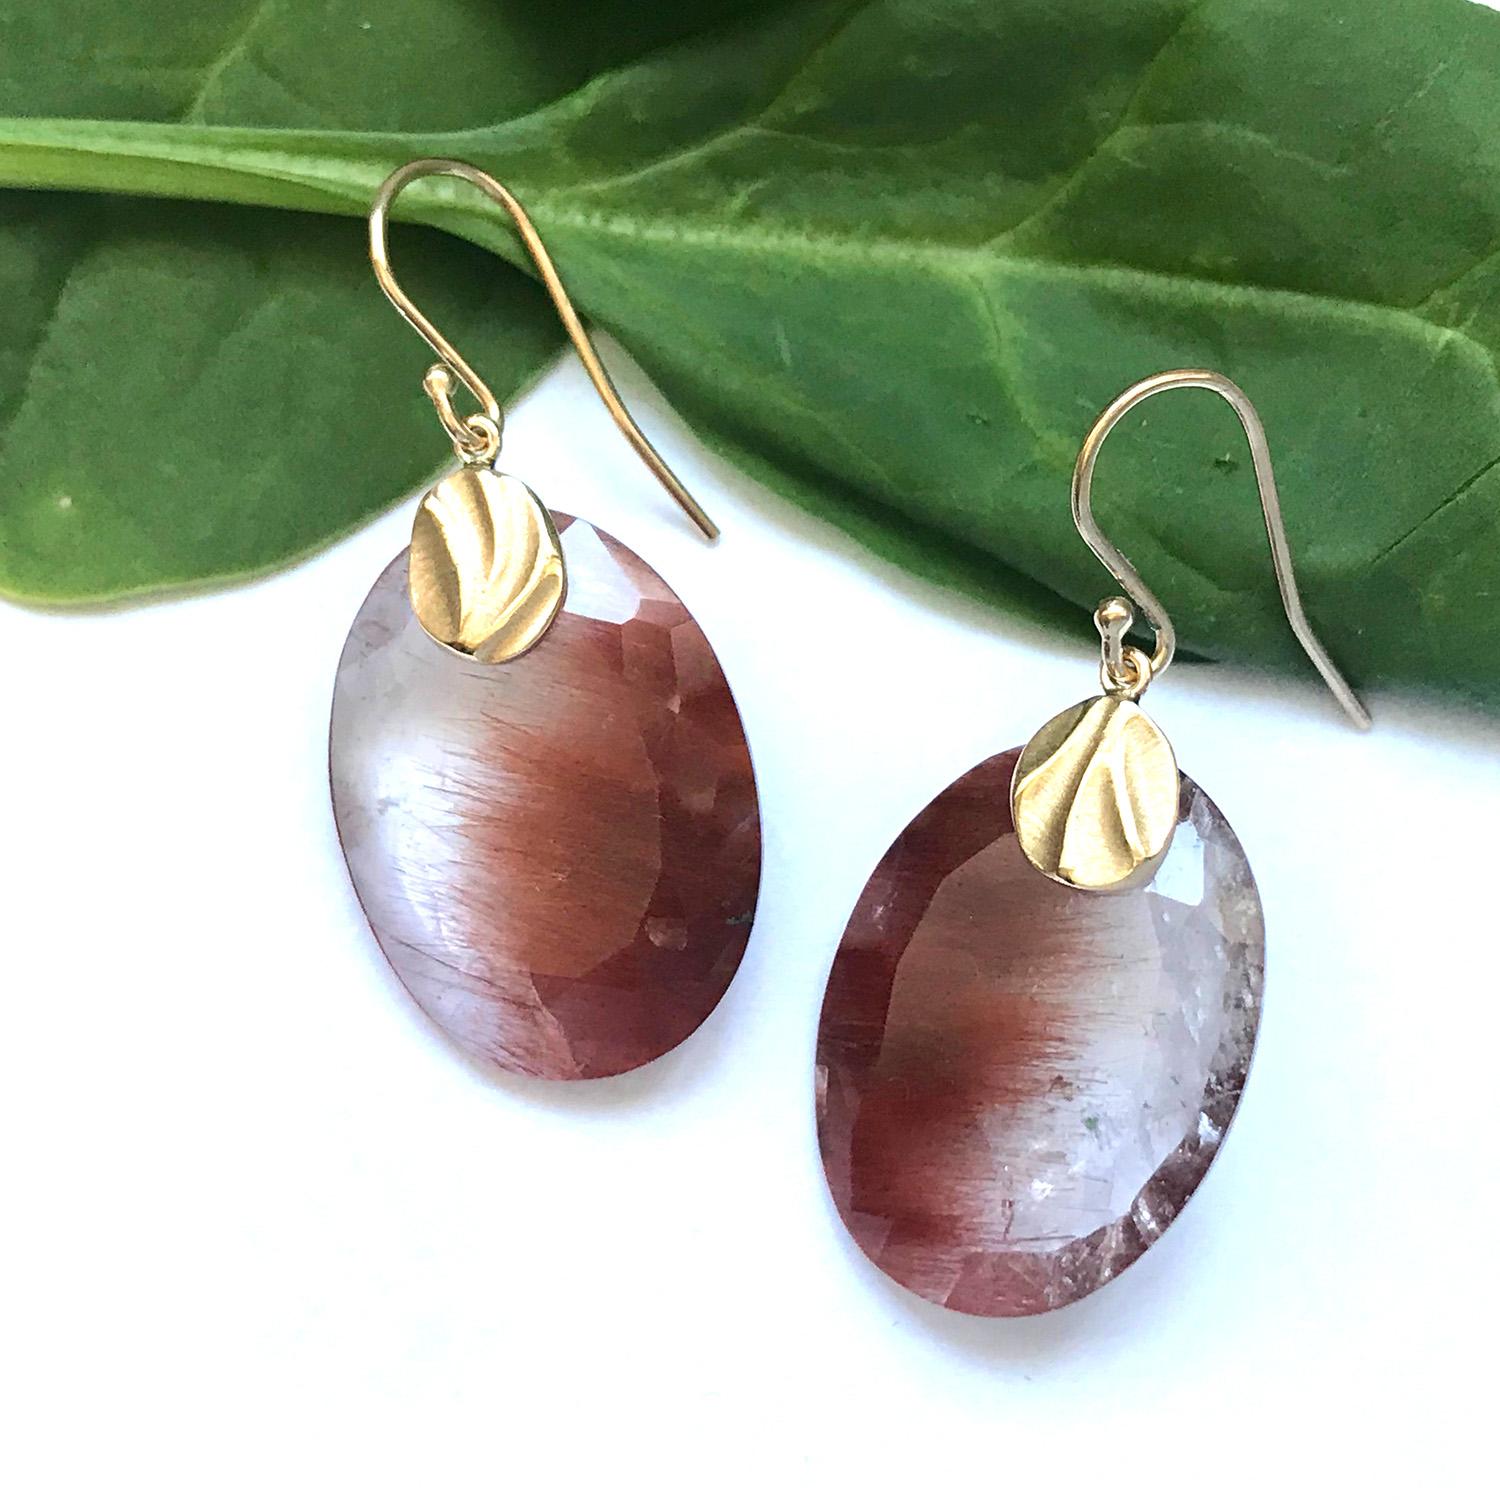 Stunning red rutilated quartz (29.27ct total weight) shaped like oval pebbles are the heart of K.Mita’s Oval Pebble Earrings. The long needle-like threads of rutile floating in the quartz are said to promote healing and to combat negative energy.